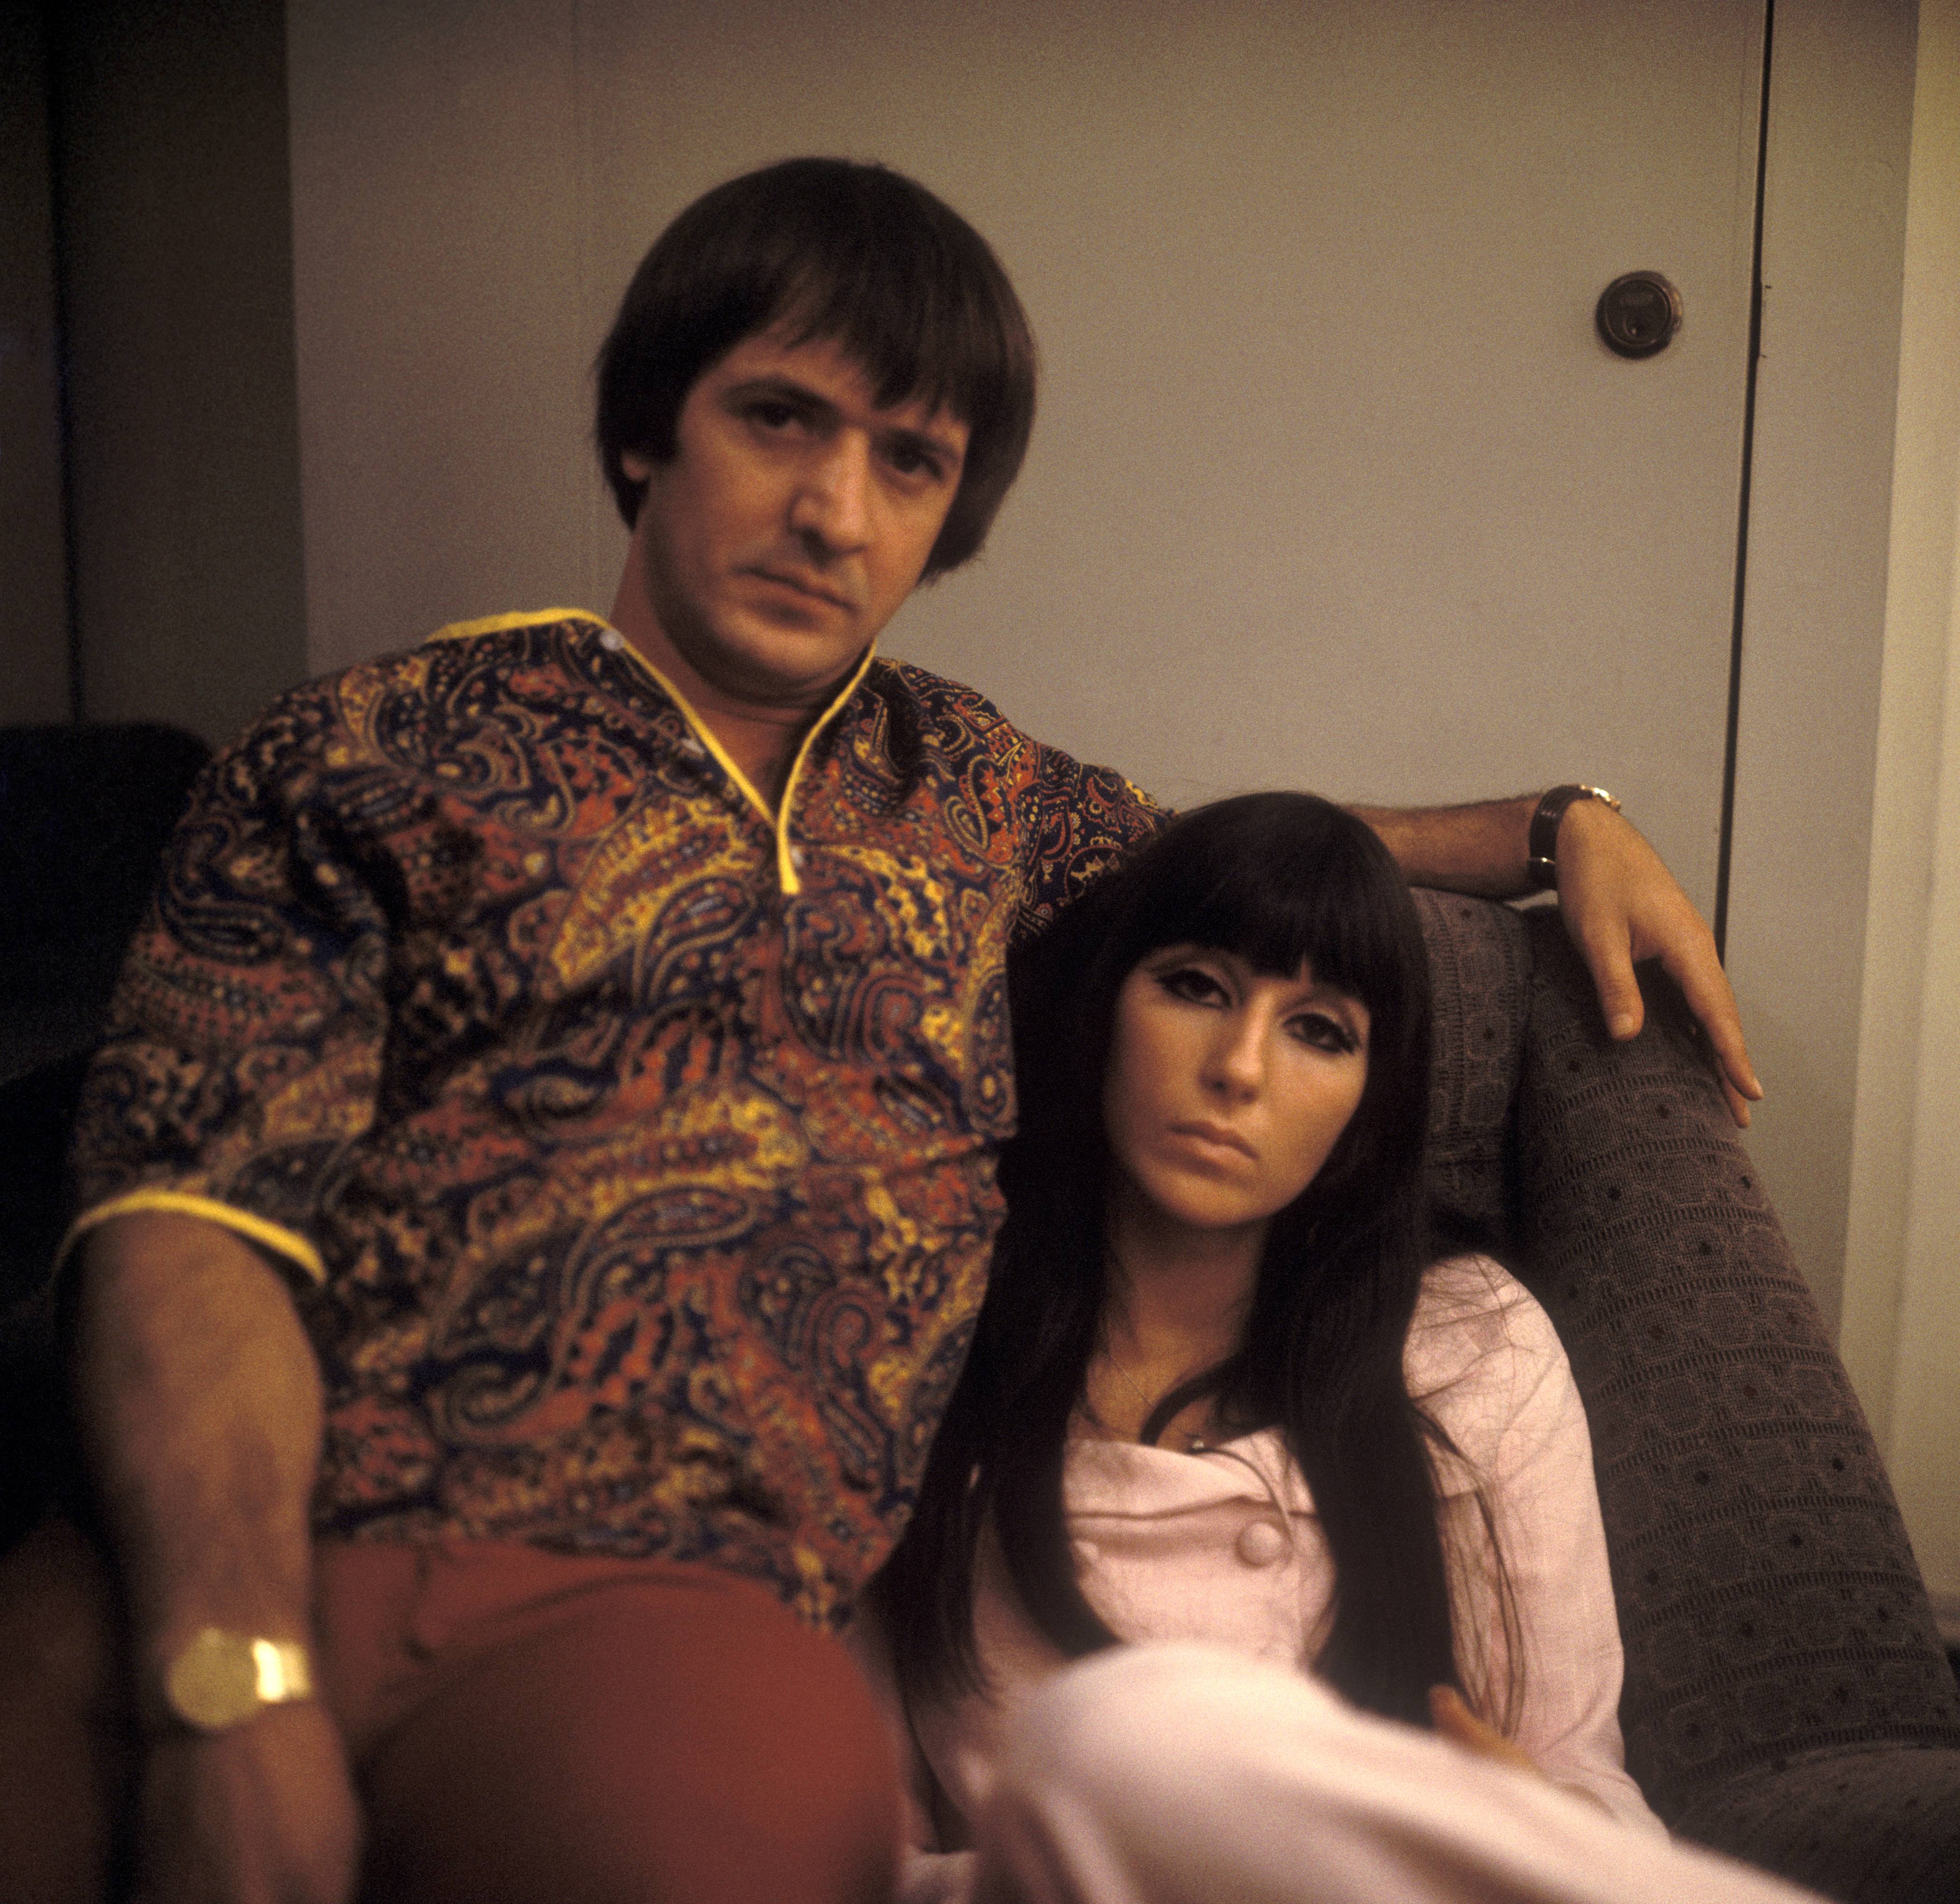 Singers Sonny Bono and Cher in the United Kingdom circa 1960 | Source: Getty Images